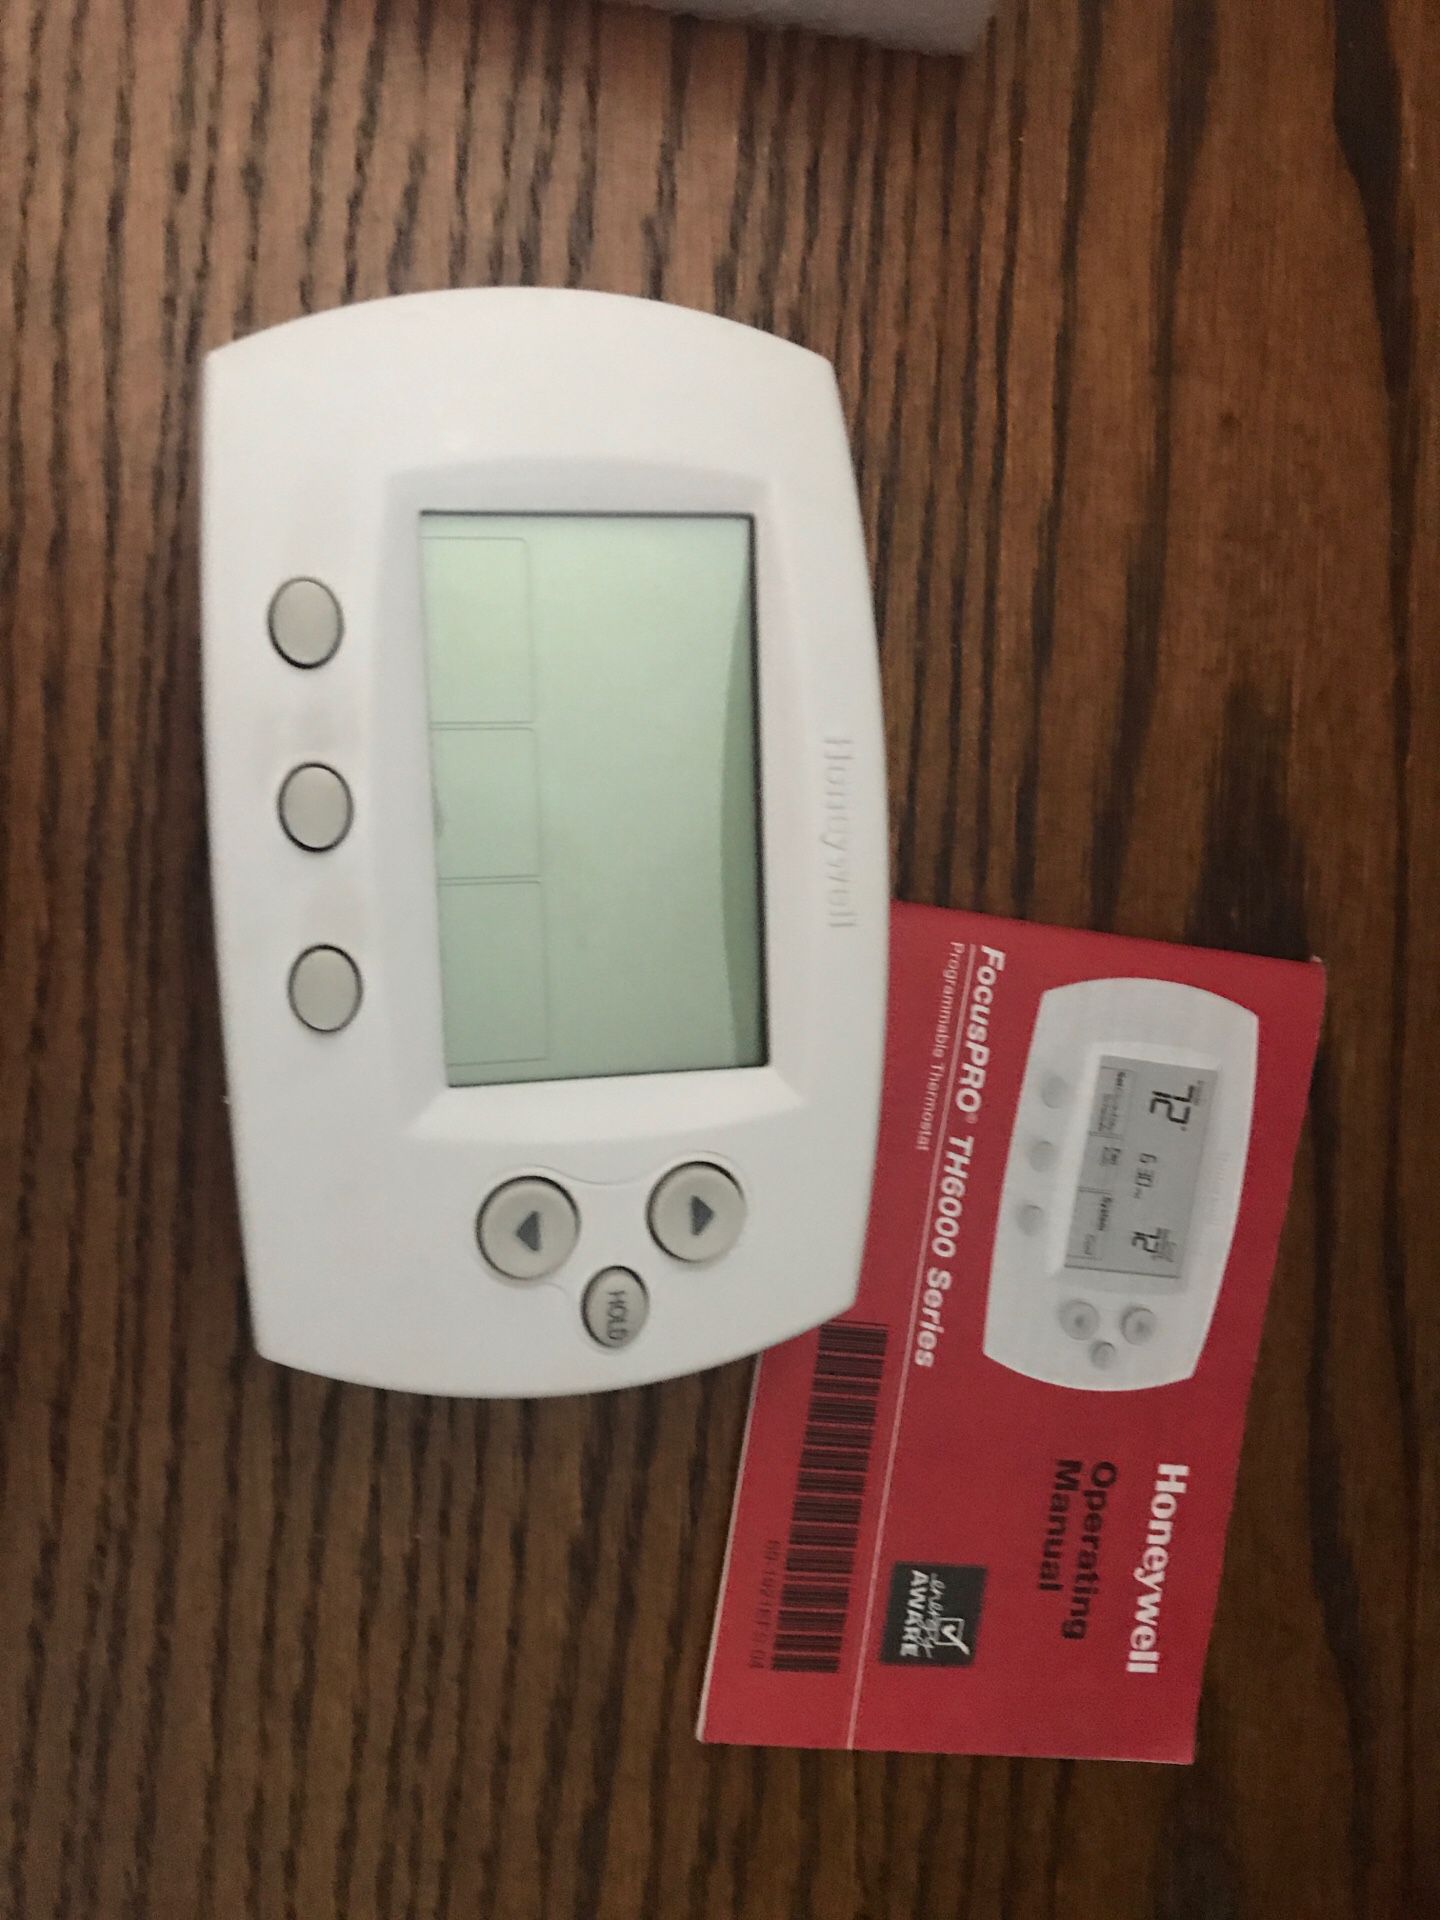 AC THERMOSTAT PROGRAMMABLE